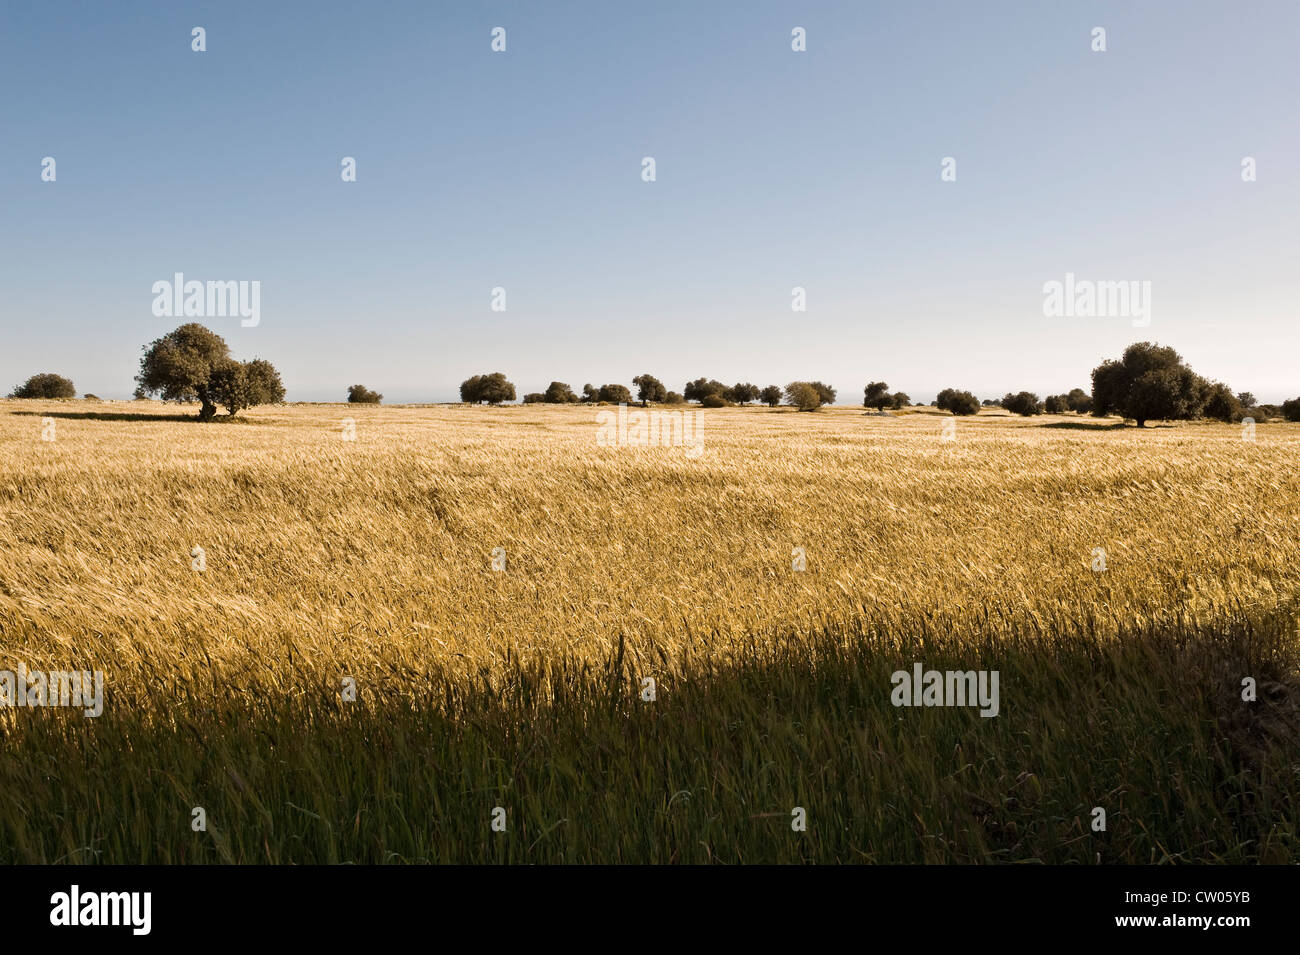 Olive trees growing in a field of ripe durum wheat (triticum durum), used for making pasta (Sicily, Italy) Stock Photo